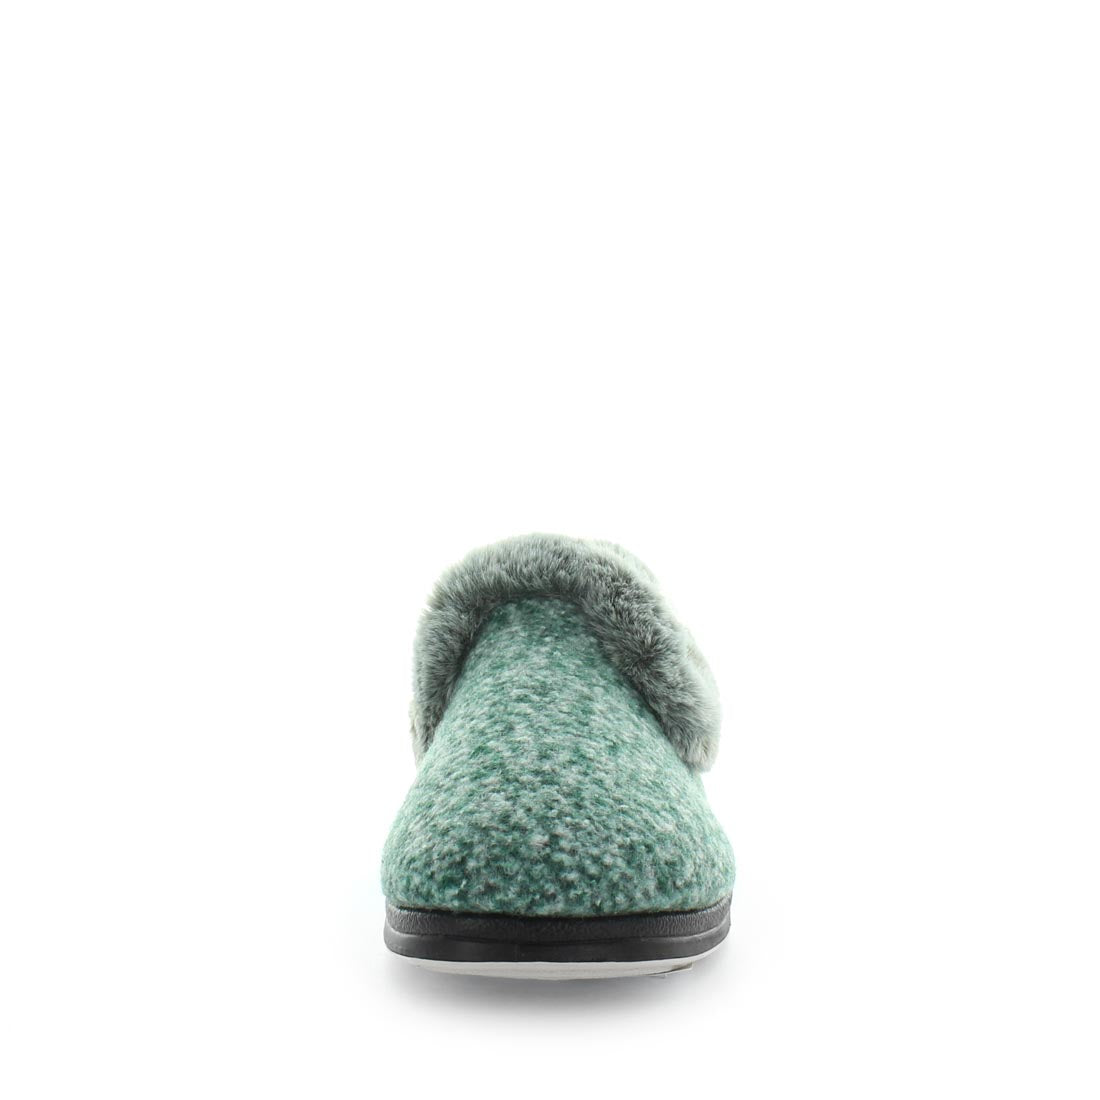 Classic womens slip on slipper, Emille by panda slippers. A green slipper made with soft materials and comfy fit design for the perfect indoor slipper. showing a non slip sole and micro terry trimming,